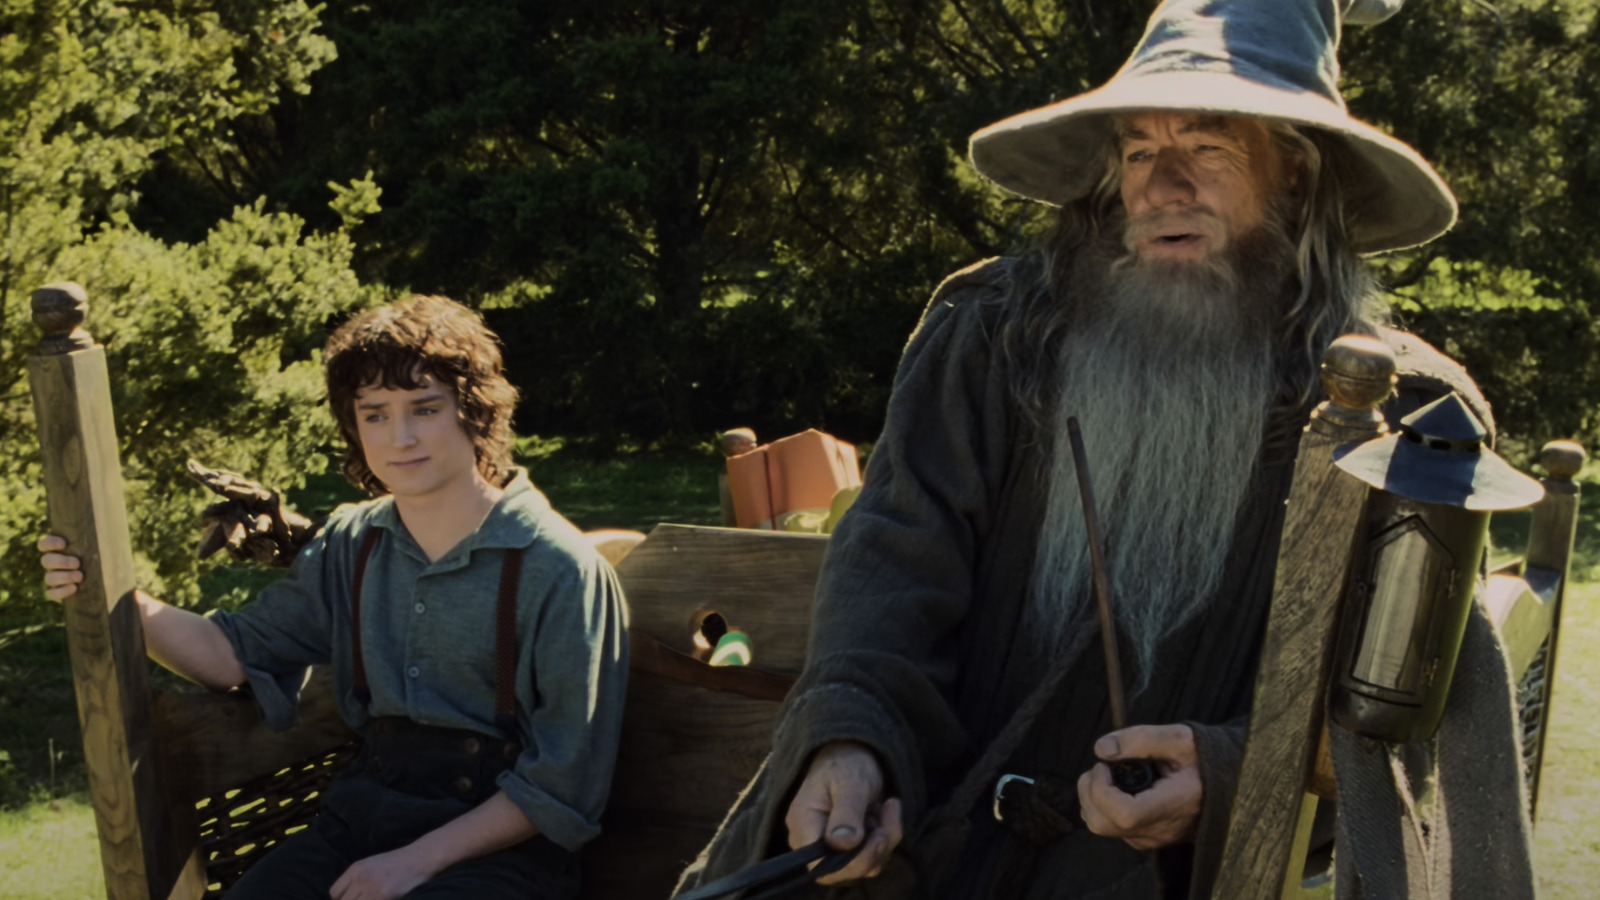 New Lord of the Rings films in development at Warner Bros.